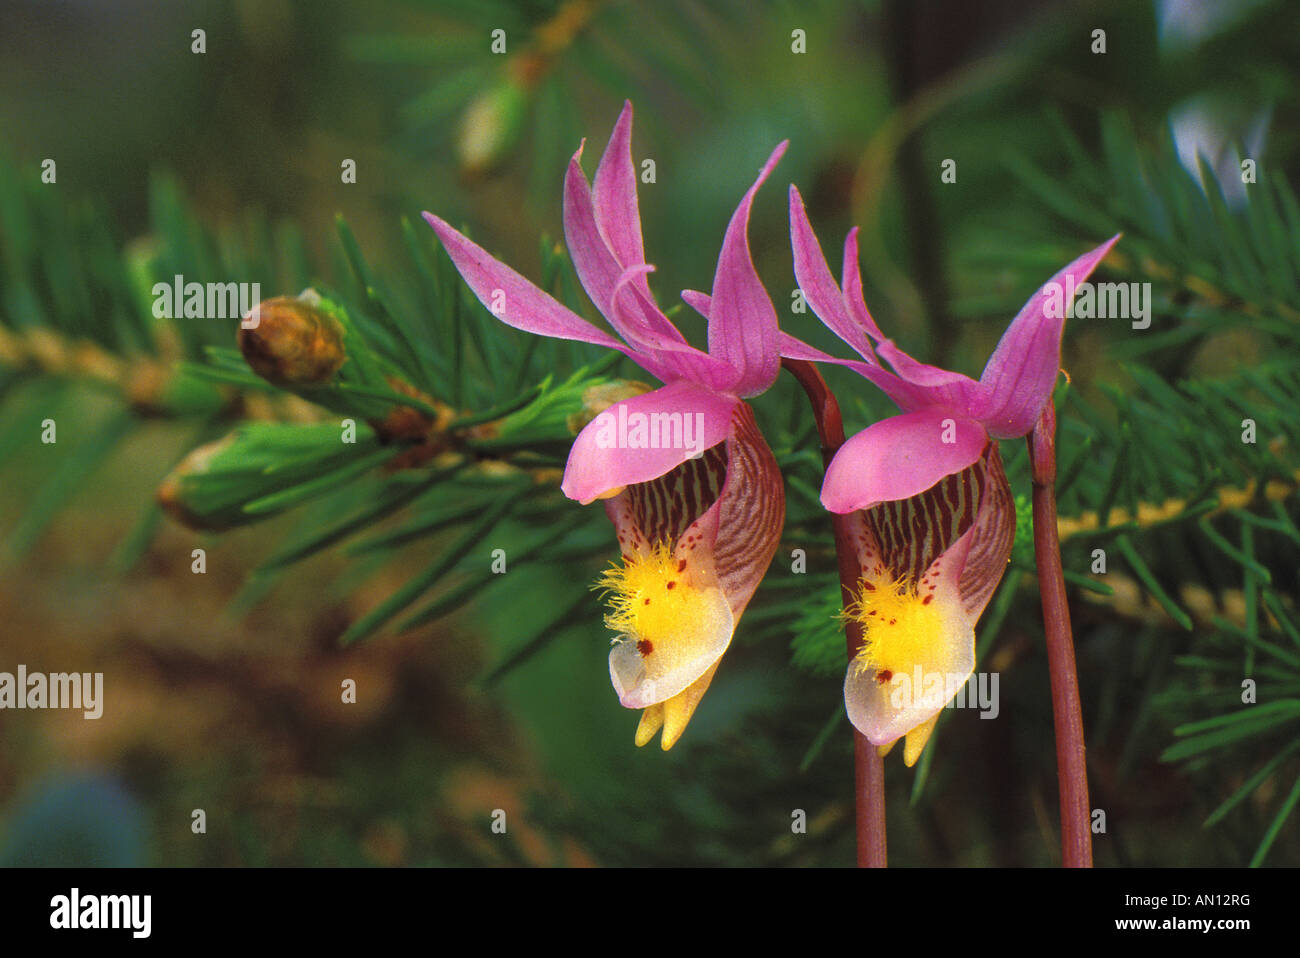 USA, Michigan, Upper Peninsula, Pair of calypso orchids in front of balsam fir. Stock Photo